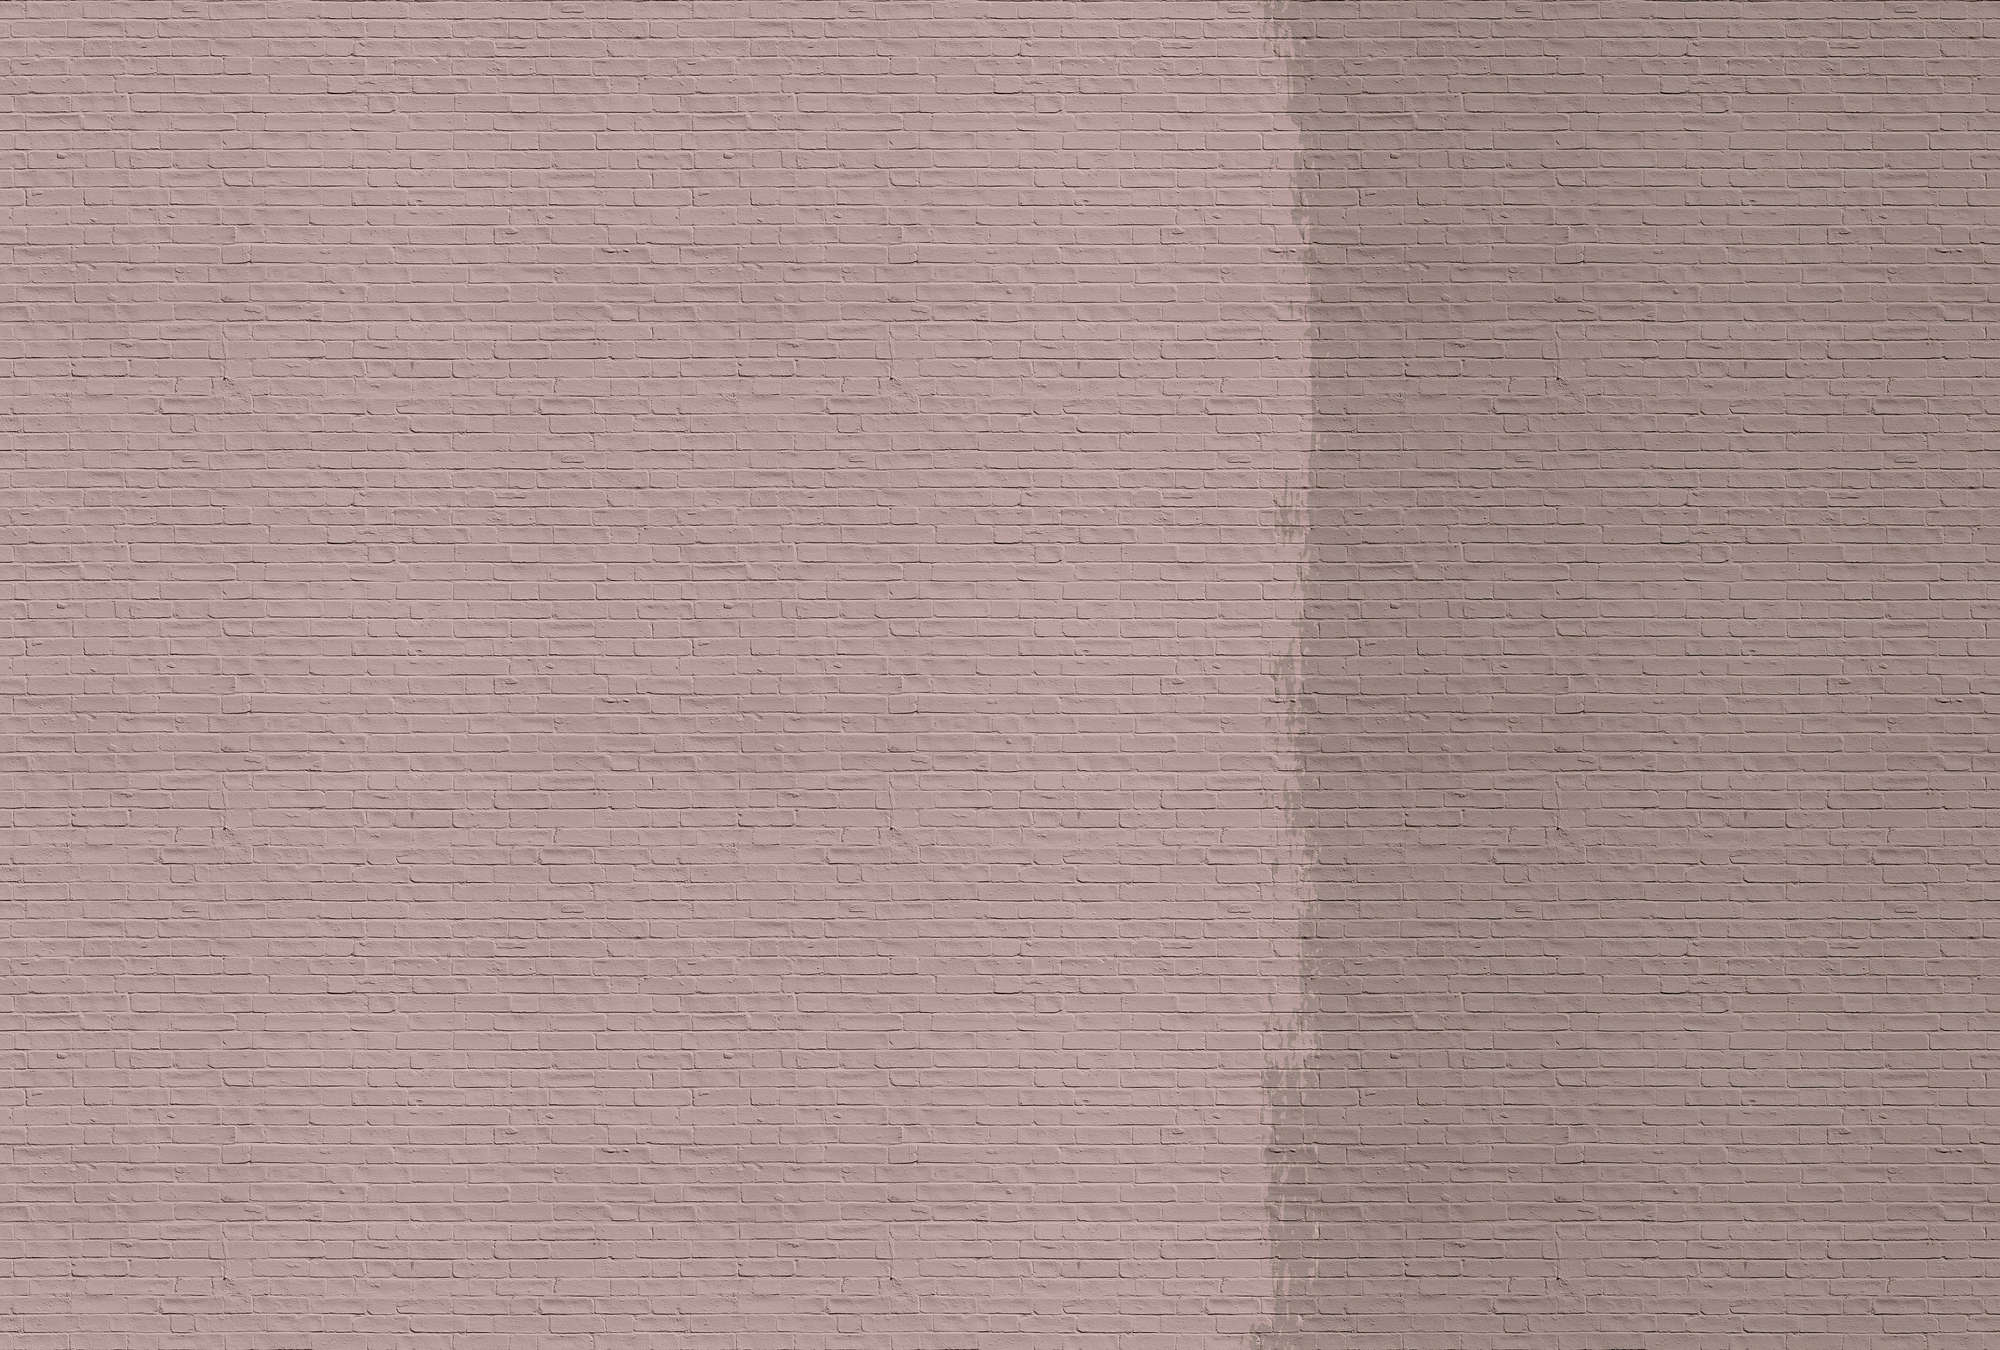             Tainted love 2 - Painted brick wall mural - Pink, Taupe | Premium smooth fleece
        